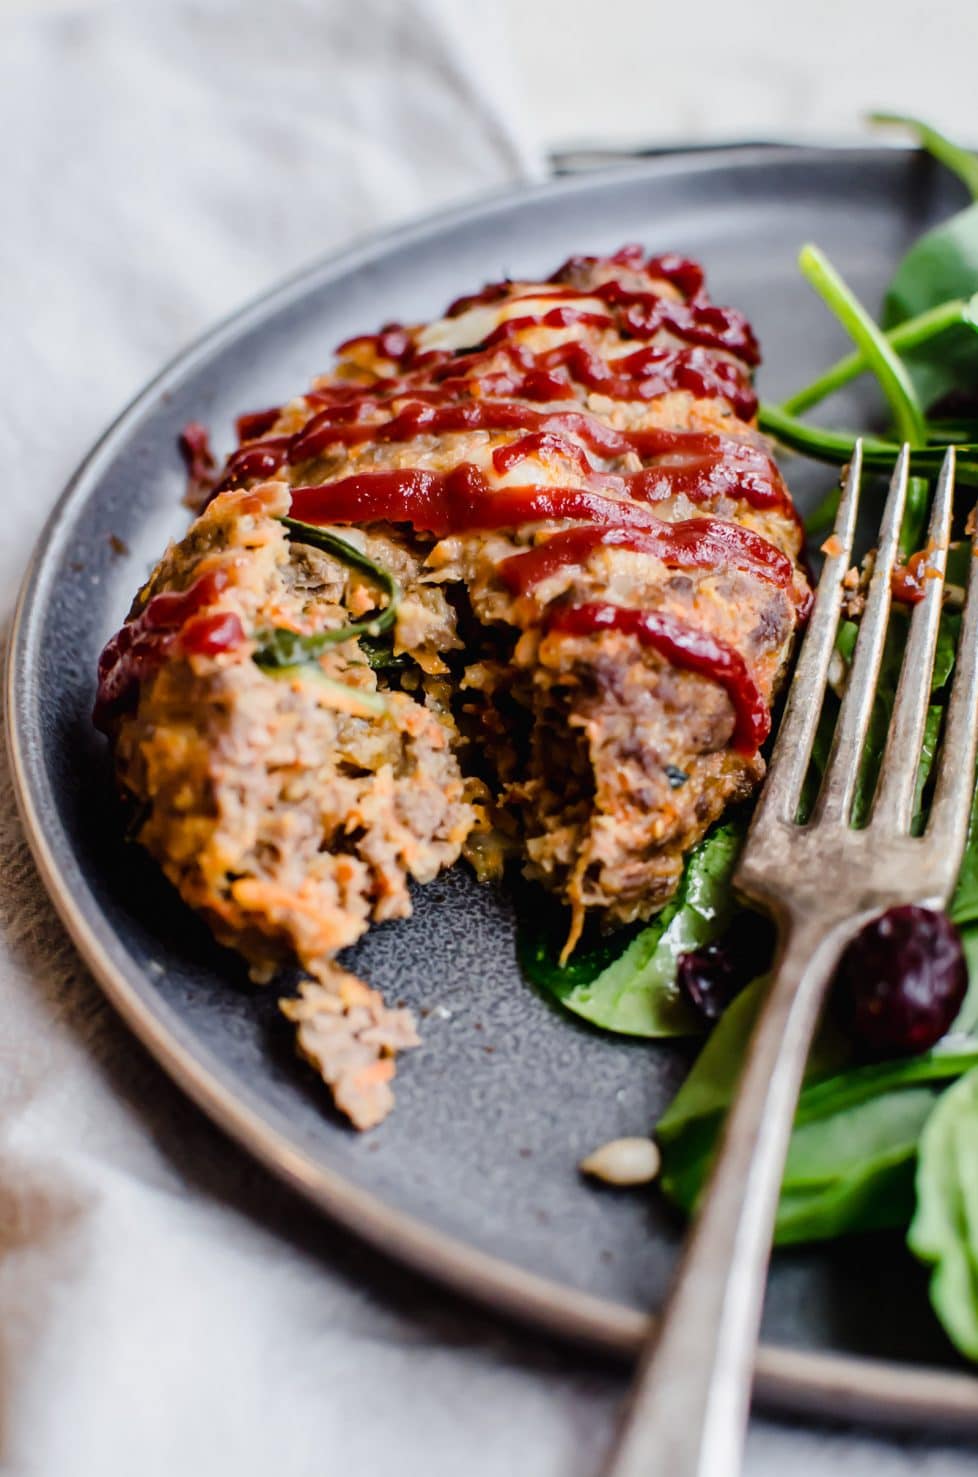 A grey plate with a mini meatloaf and spinach salad with a fork taking a bite out of the meatloaf.